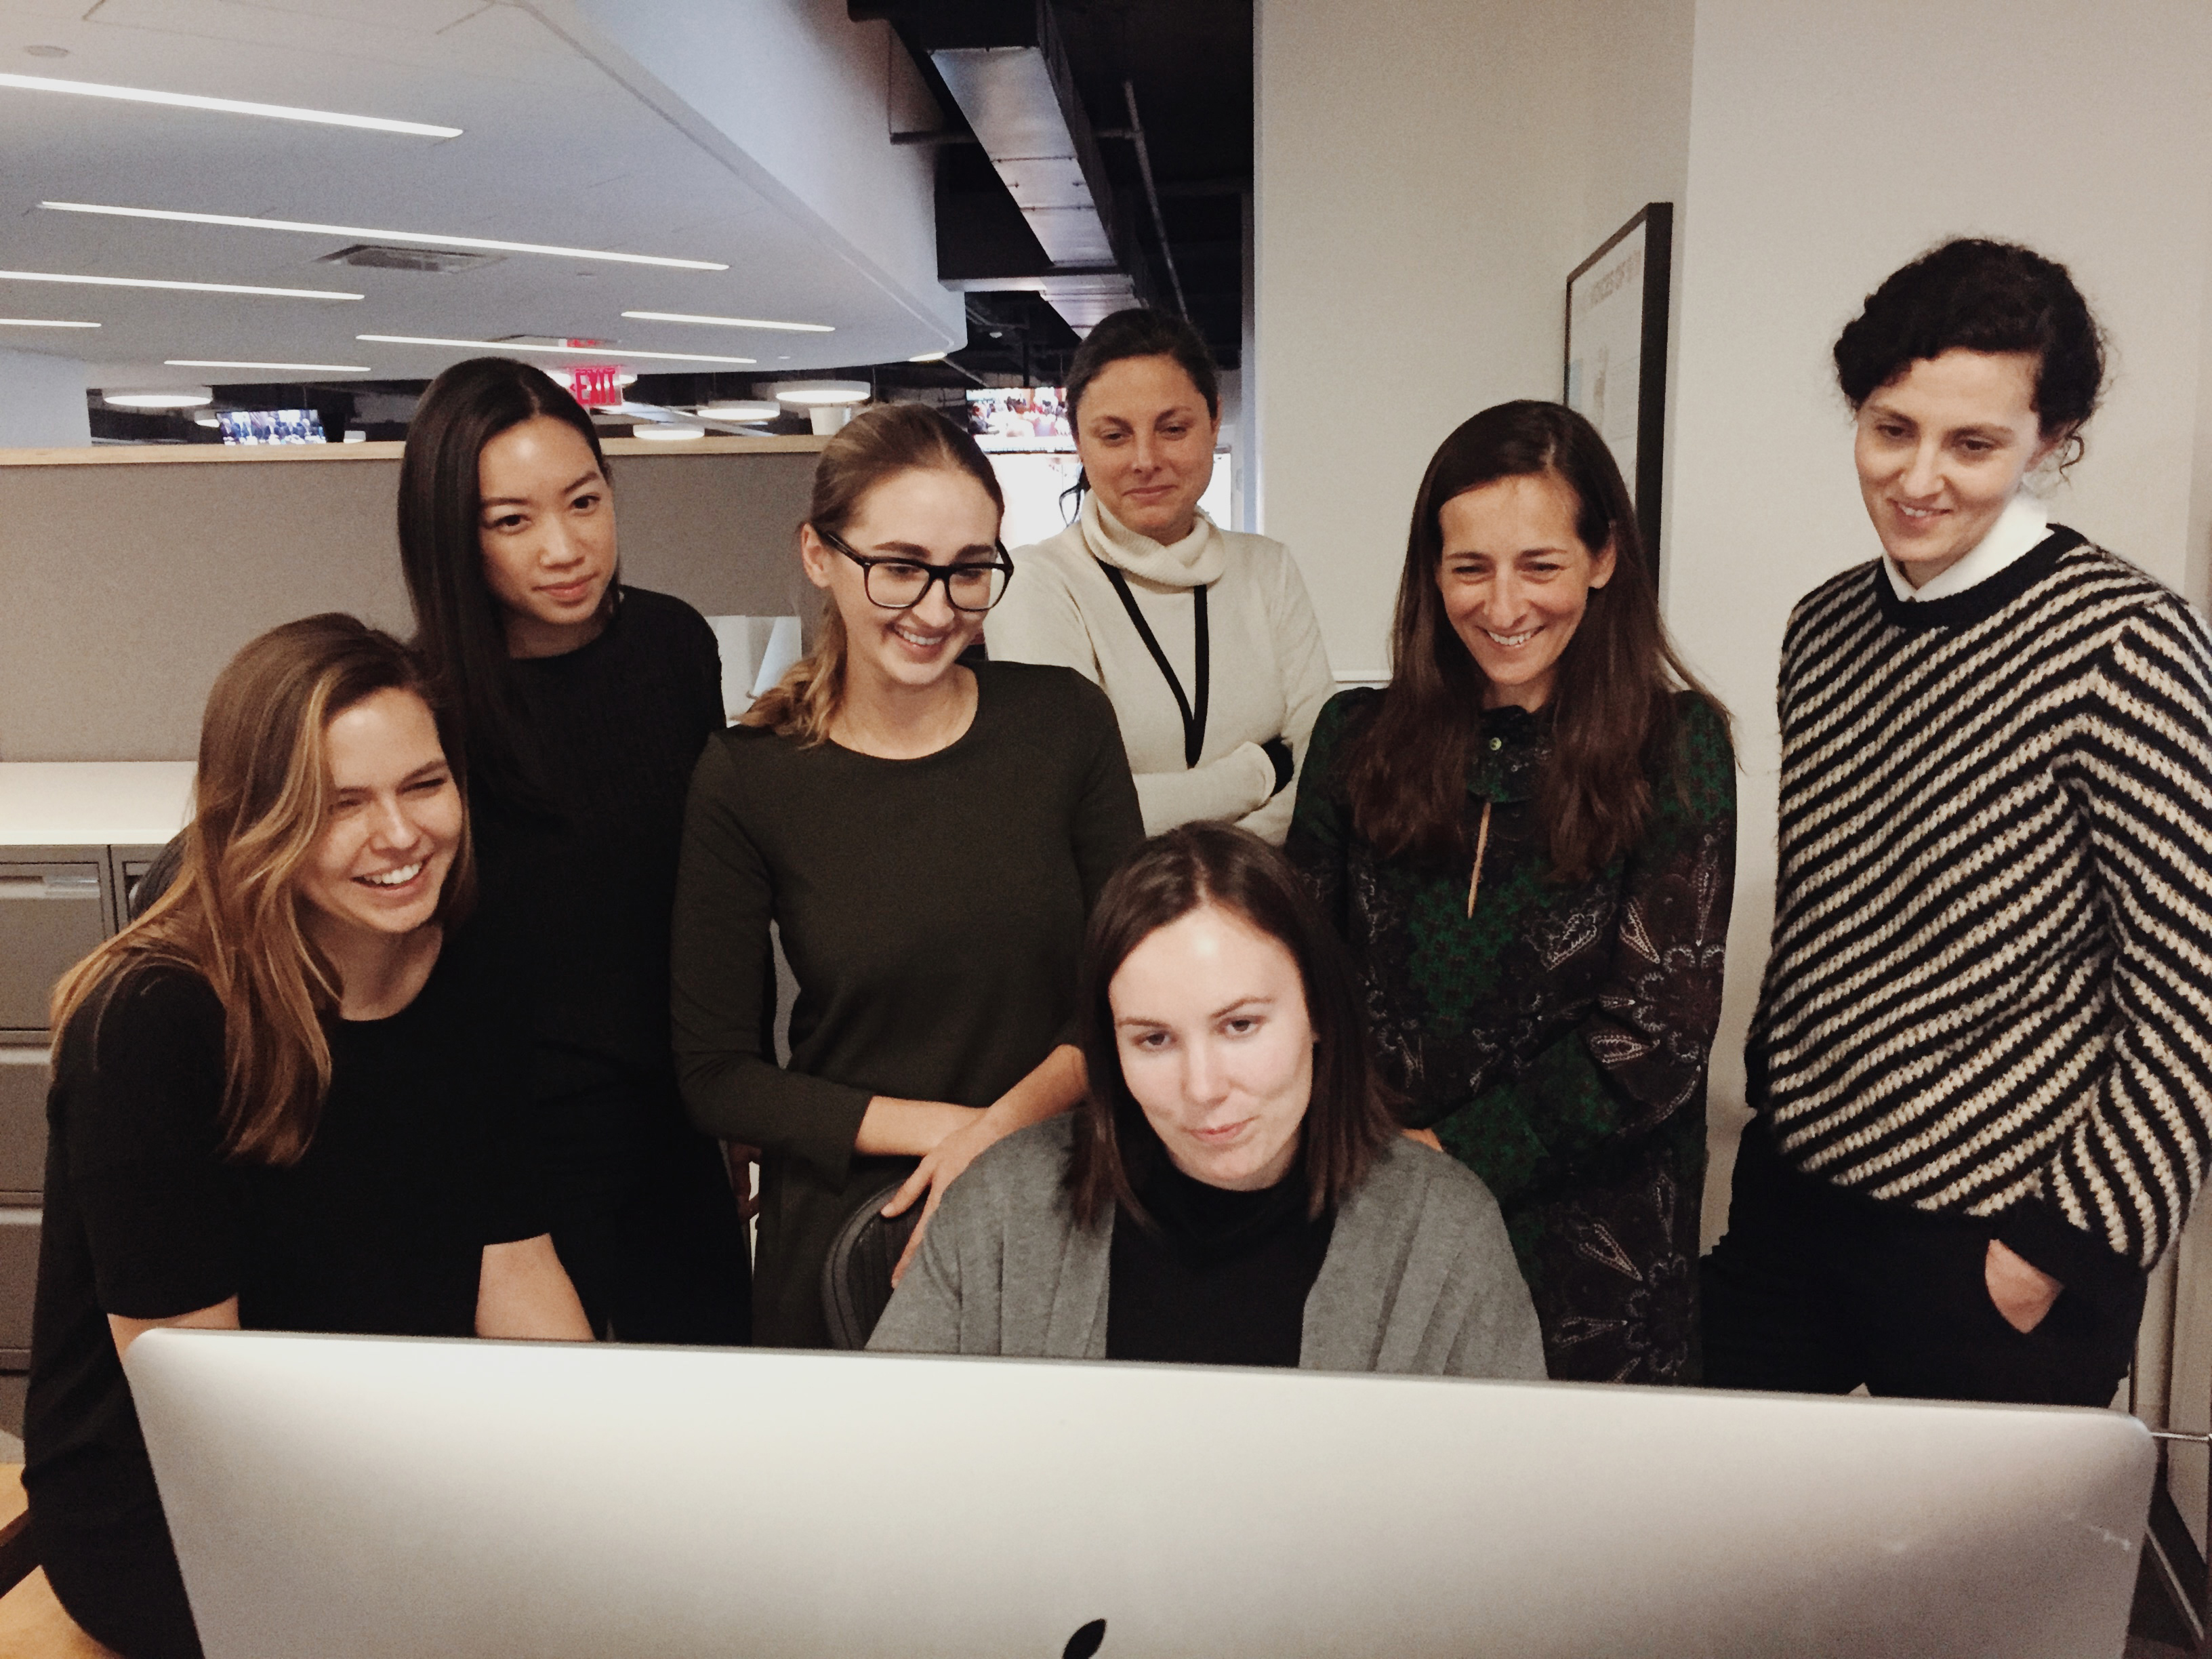 Photographer Luisa Dörr reviews a picture edit at the TIME offices with the project team (l-r): Spencer Bakalar, Diane Tsai, Luisa Dorr, Justine Simons, Tara Johnson (front center), Kira Pollack and Natalie Matutschovsky.